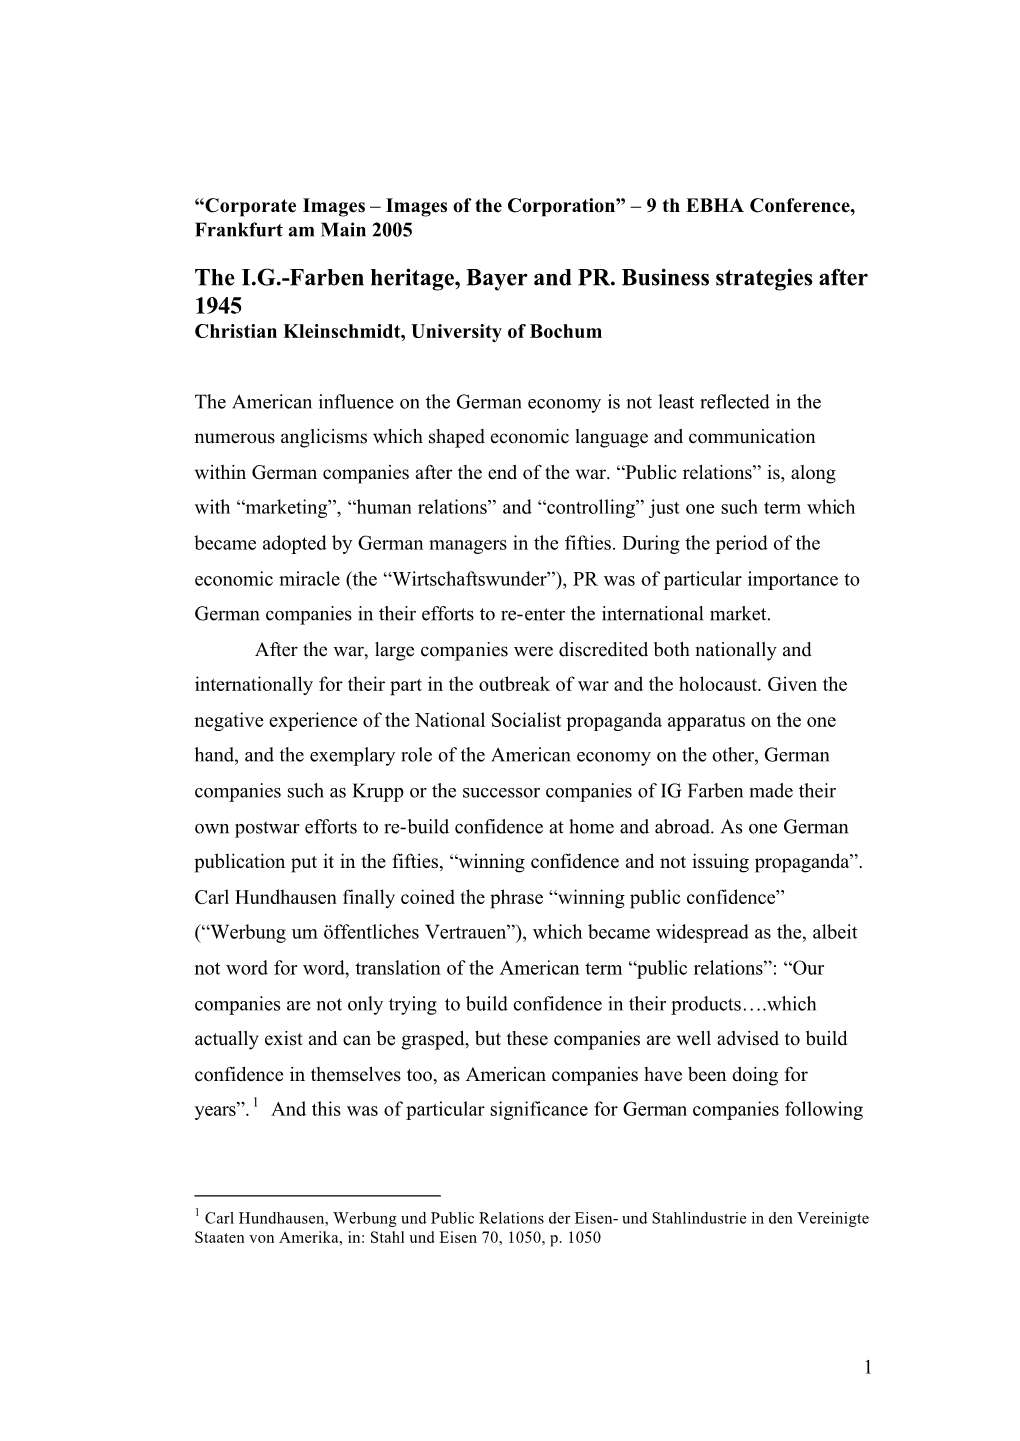 The I.G.-Farben Heritage, Bayer and PR. Business Strategies After 1945 Christian Kleinschmidt, University of Bochum